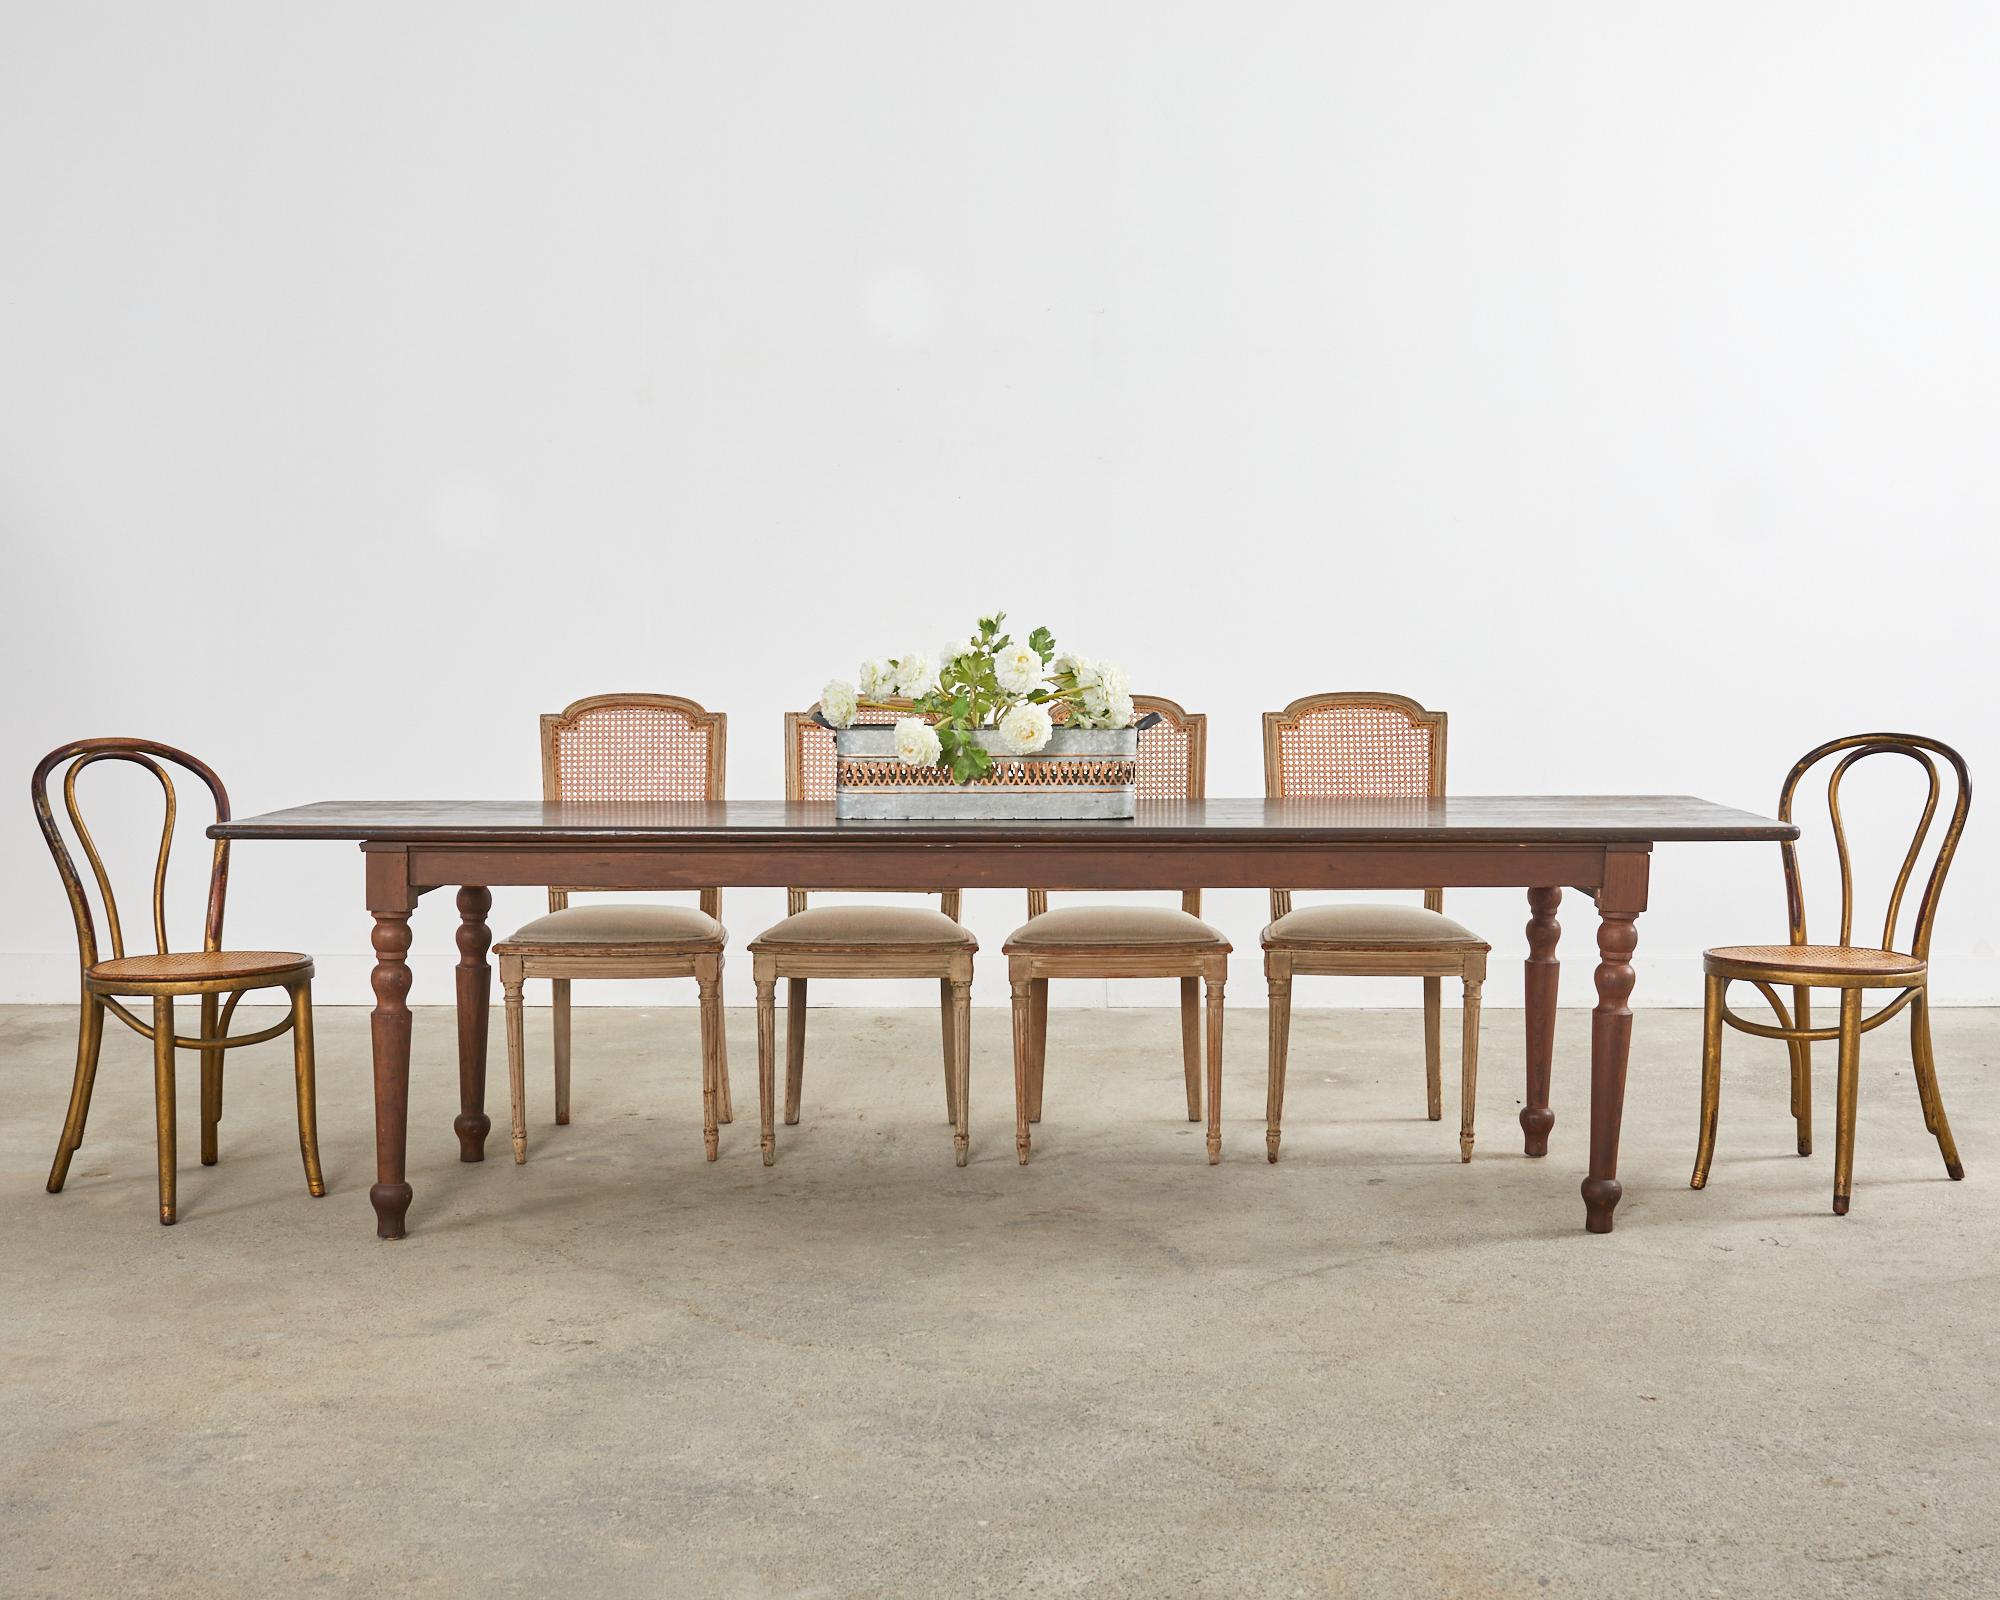 Gorgeous weathered set of four painted 19th century dining chairs made in the Swedish Gustavian taste. The chairs feature a carved frame with an arched caned back. The seats have a bowed front and have been recently upholstered with a linen fabric